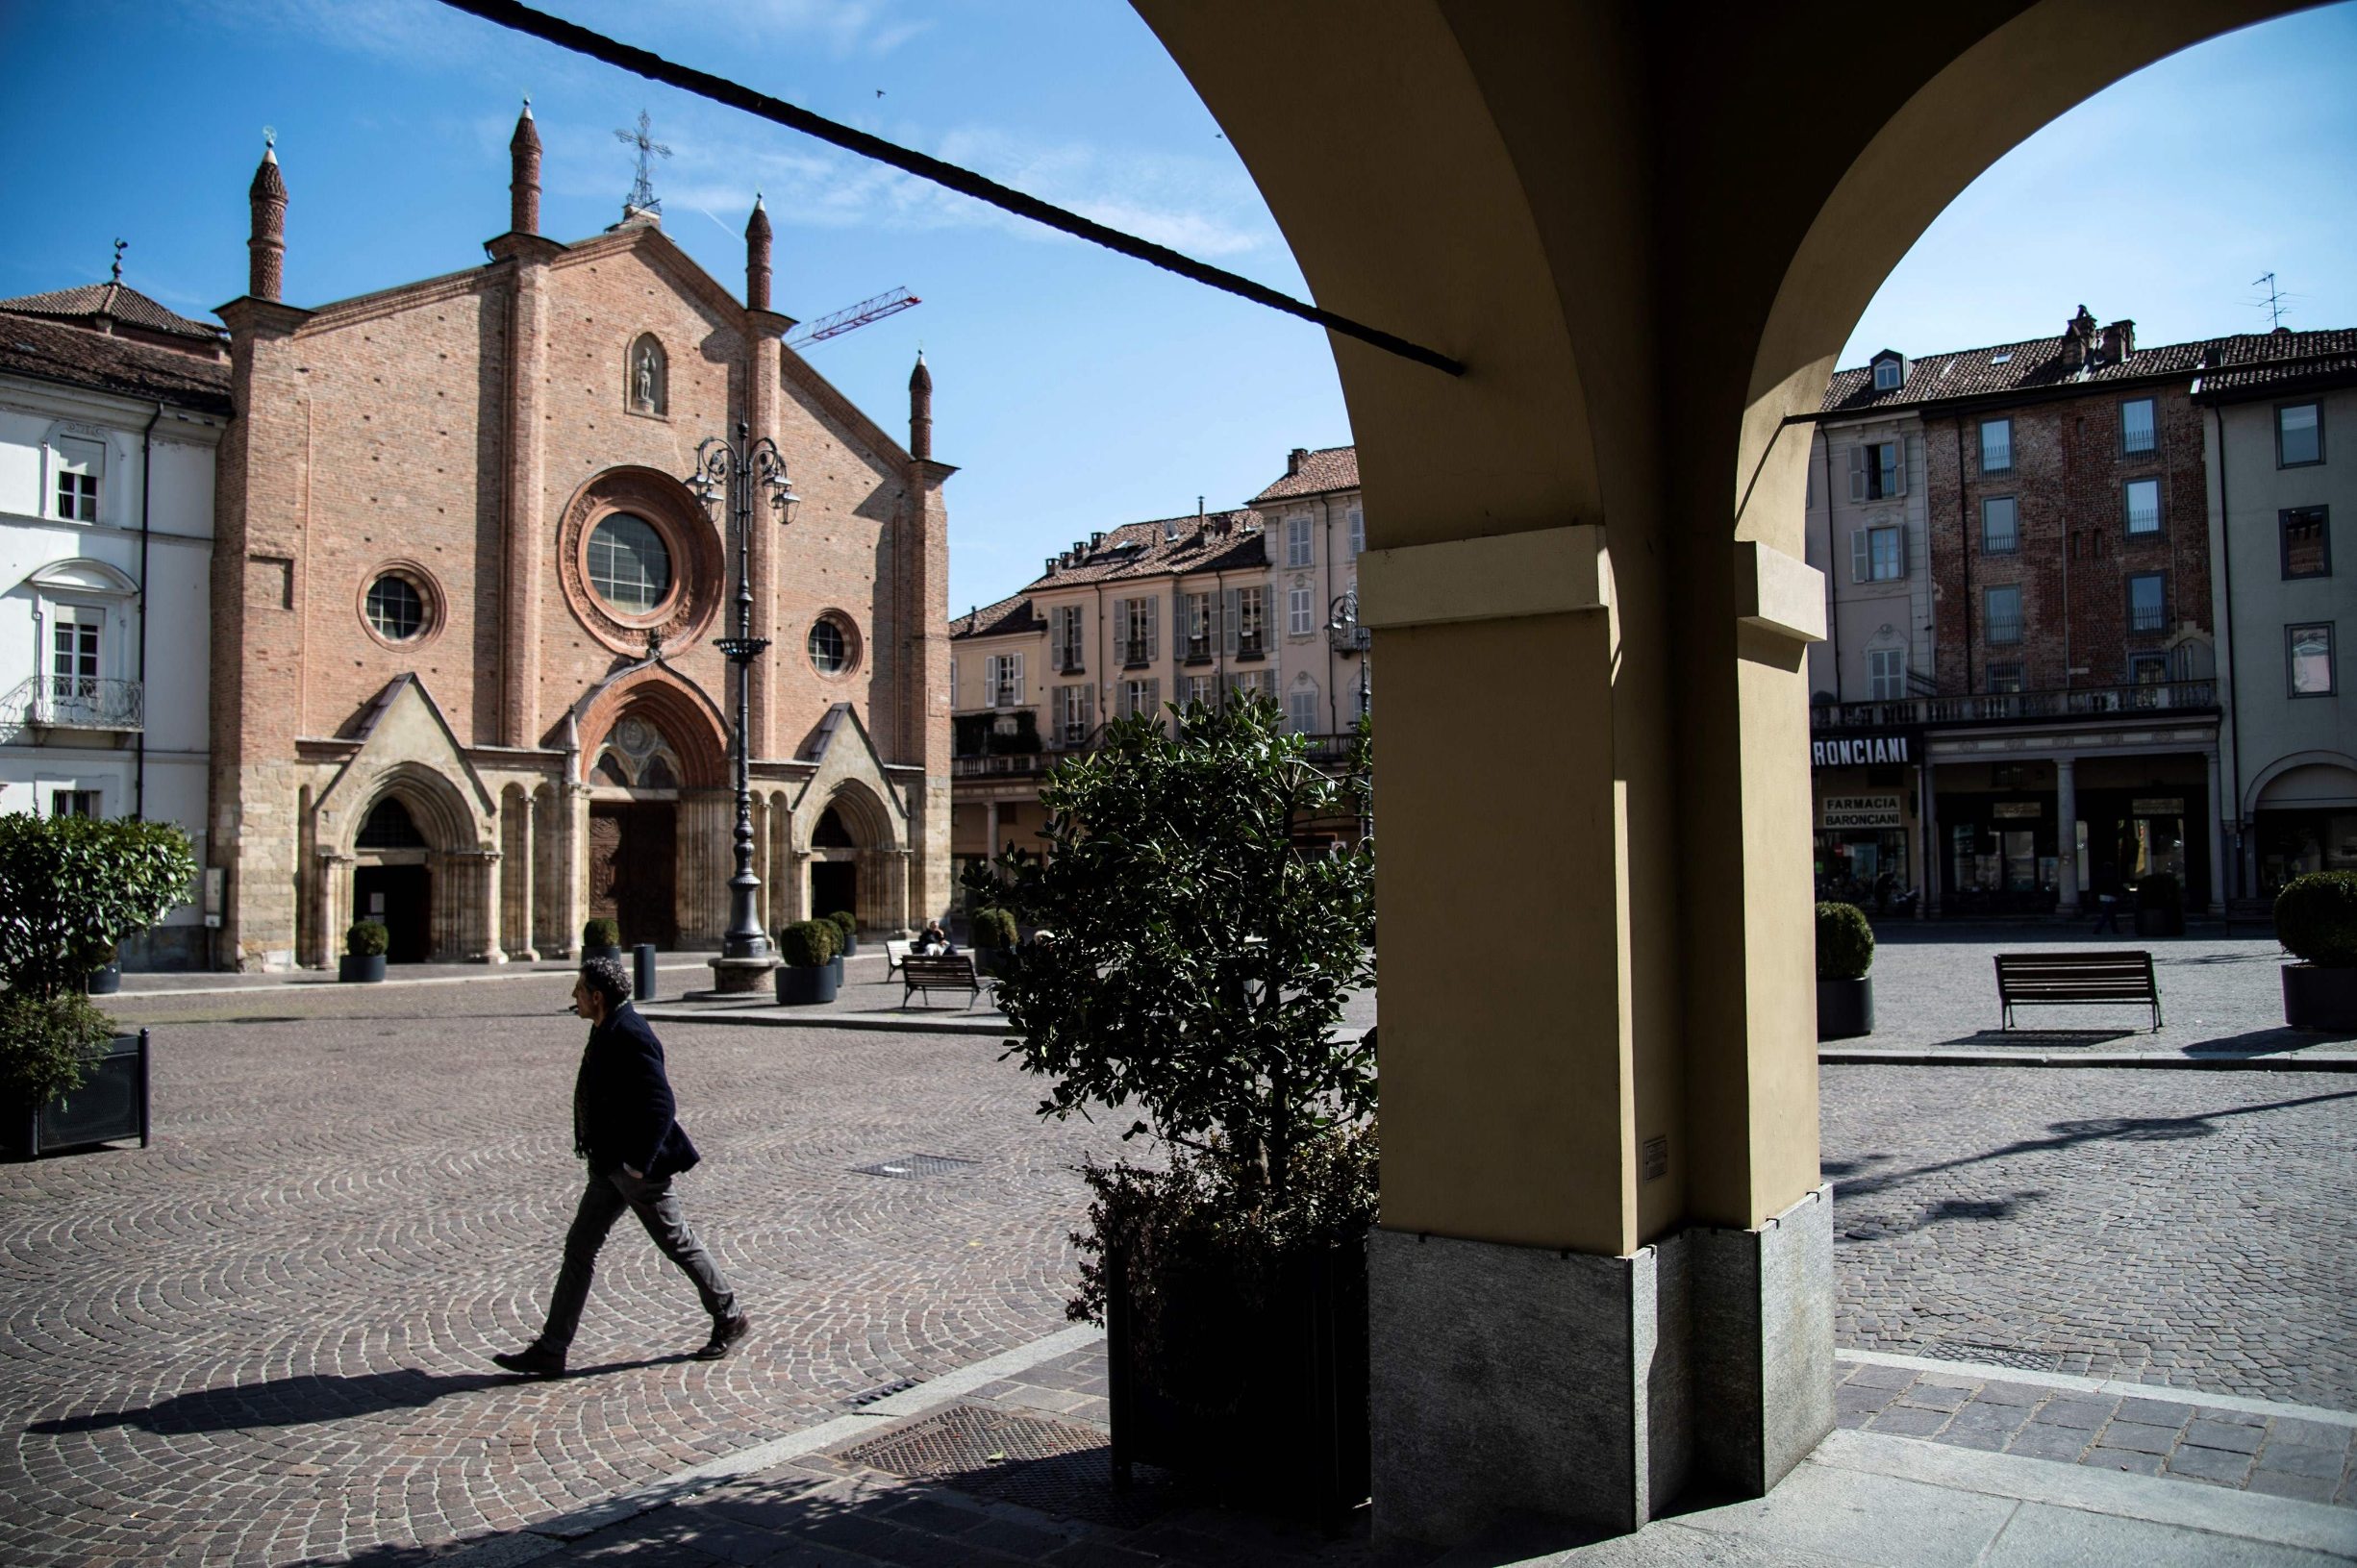 A man walks in Piazza San Secondo on March 8, 2020 in Asti, a new quarantine zone in Northwestern Italy. - A quarter of the Italian population was locked down on March 8, 2020 as the government takes drastic steps to stop the spread of the deadly new coronavirus that is sweeping the globe, with Latin America recording its first fatality. (Photo by MARCO BERTORELLO / AFP)